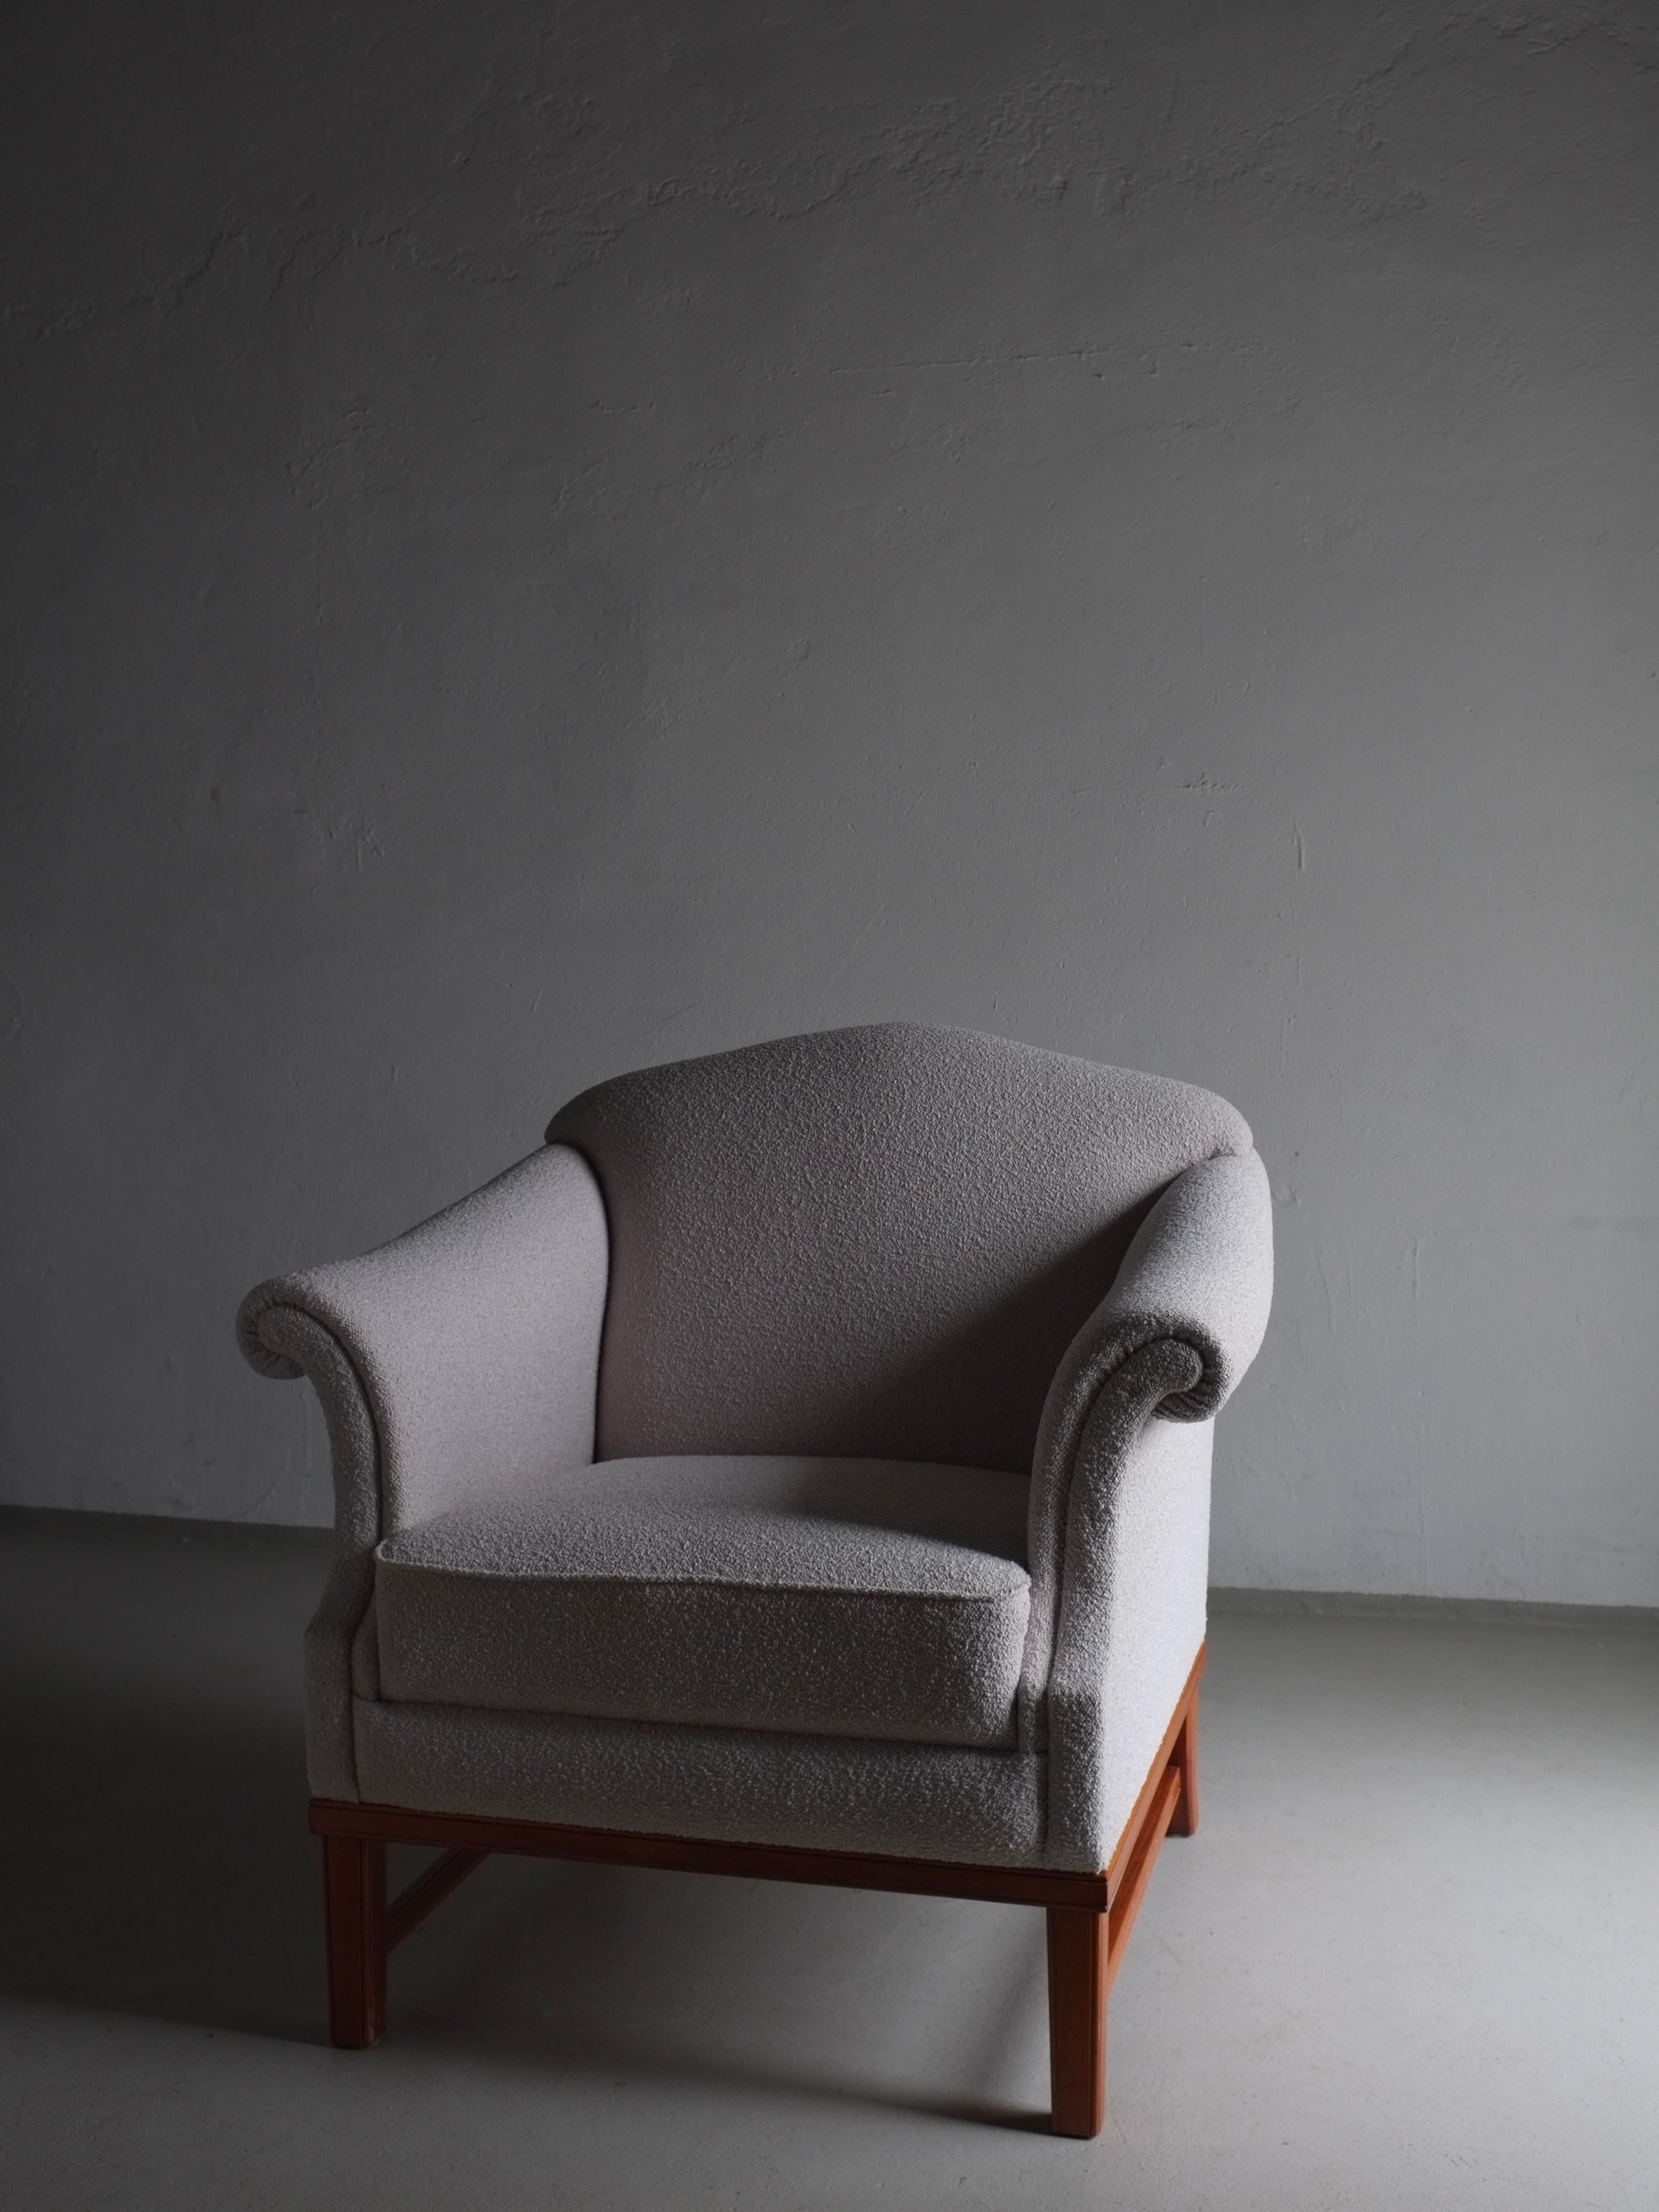 20th Century Gray Boucle Lounge Chair, Sweden 1940s For Sale